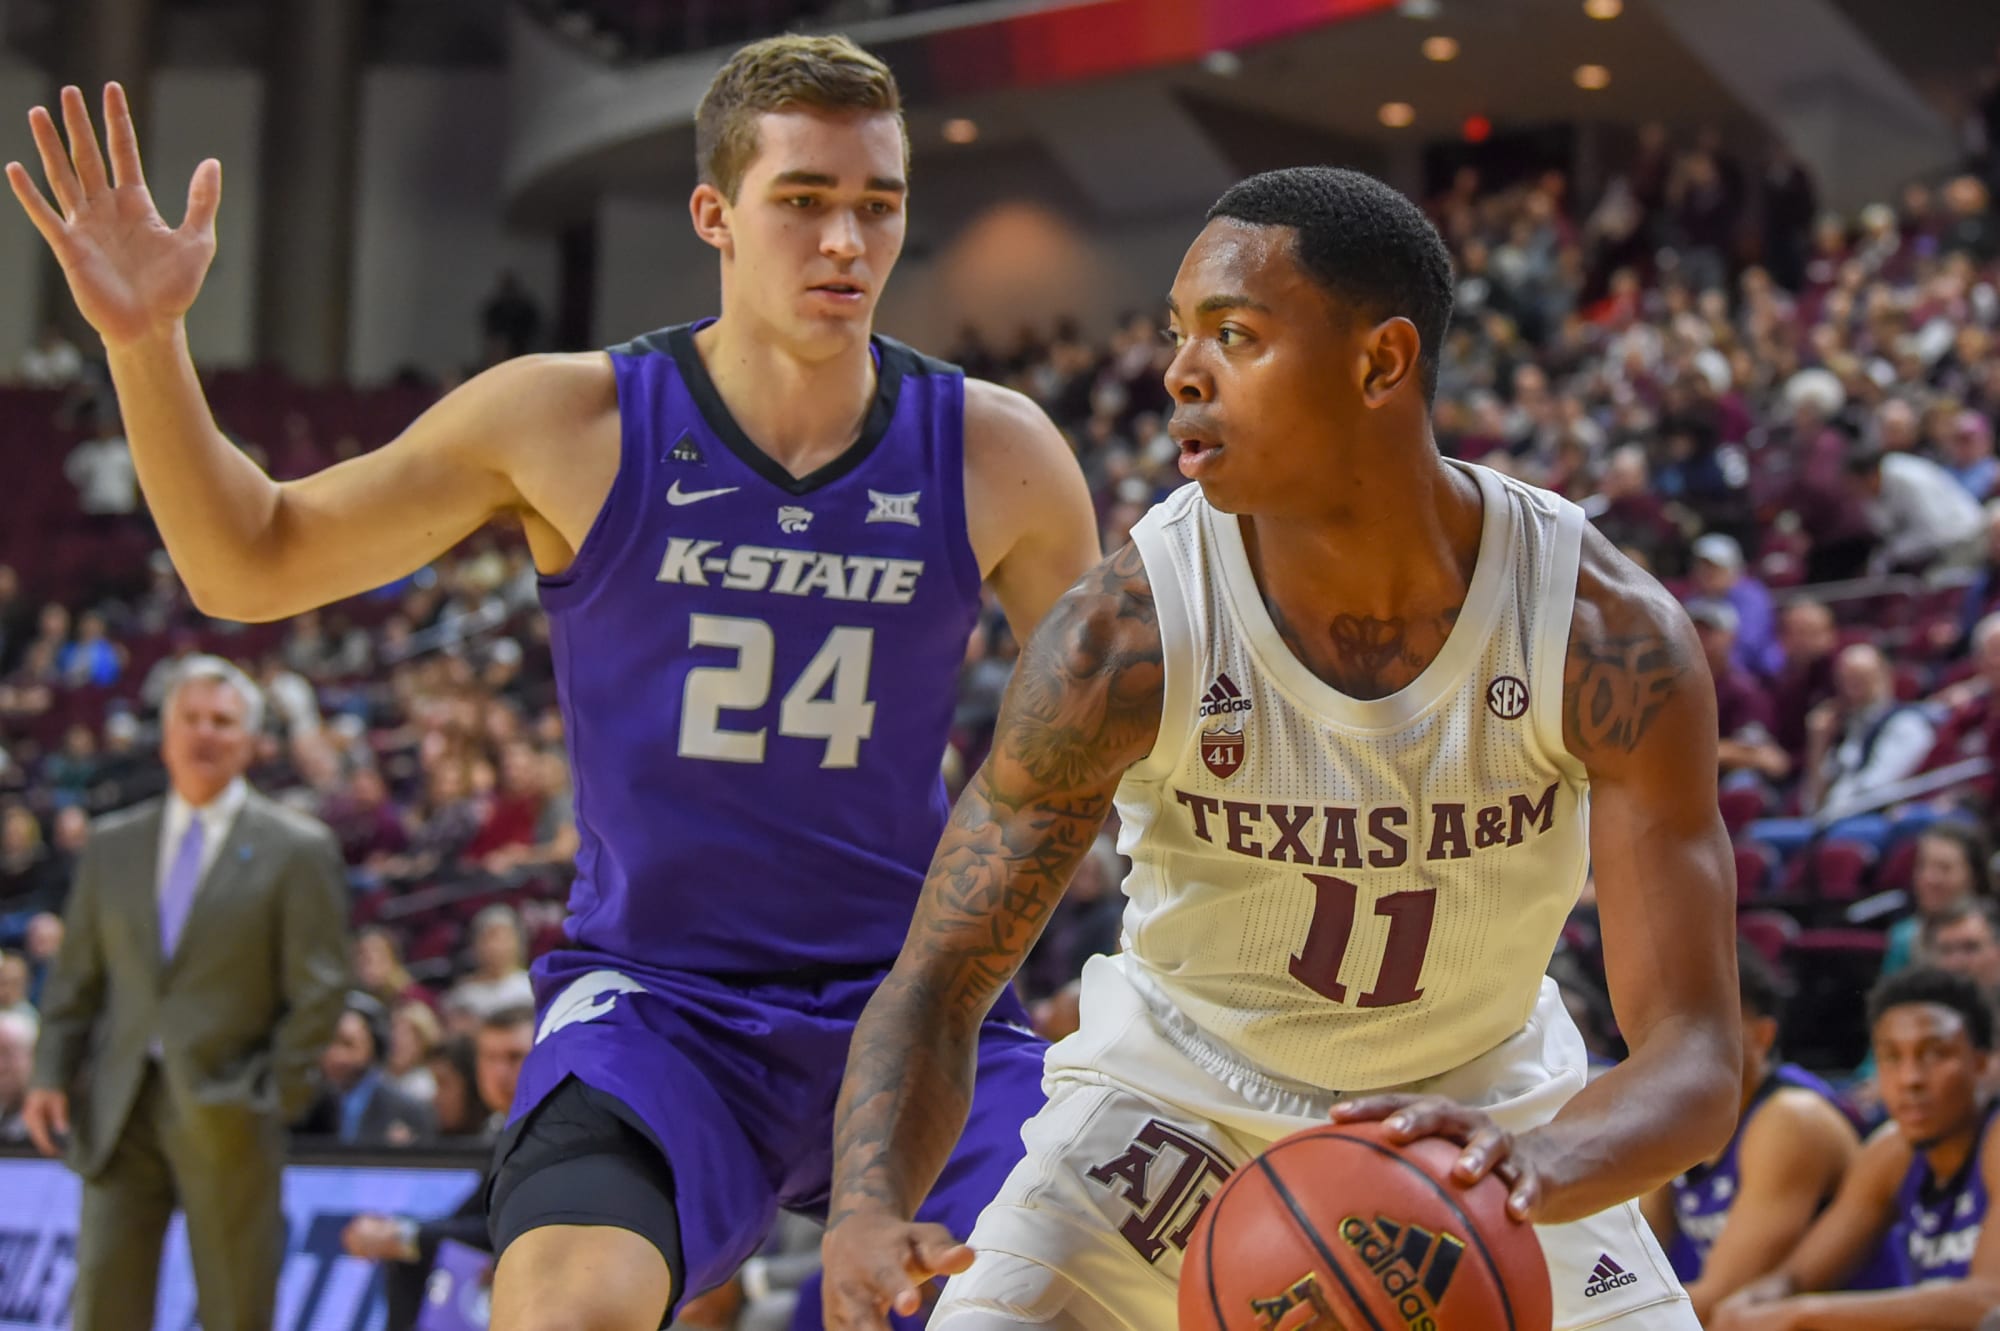 Texas A&M basketball show signs of turning season around